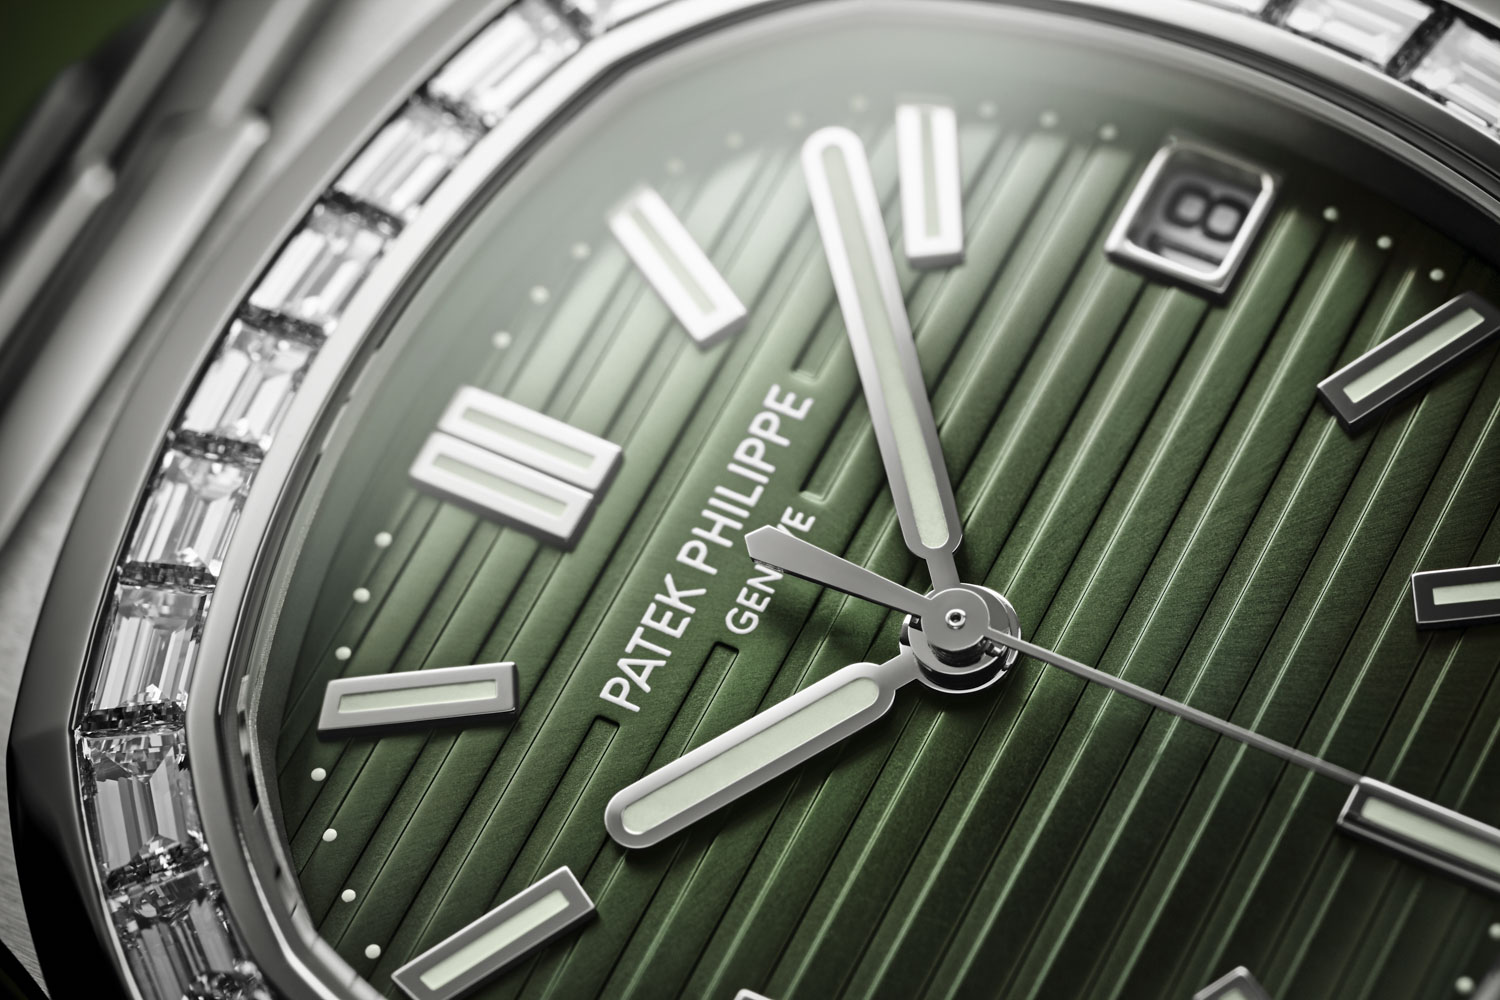 Patek Philippe Nautilus ref. 5711/1300A-001: a new and unique combination of stainless steel and baguette diamonds